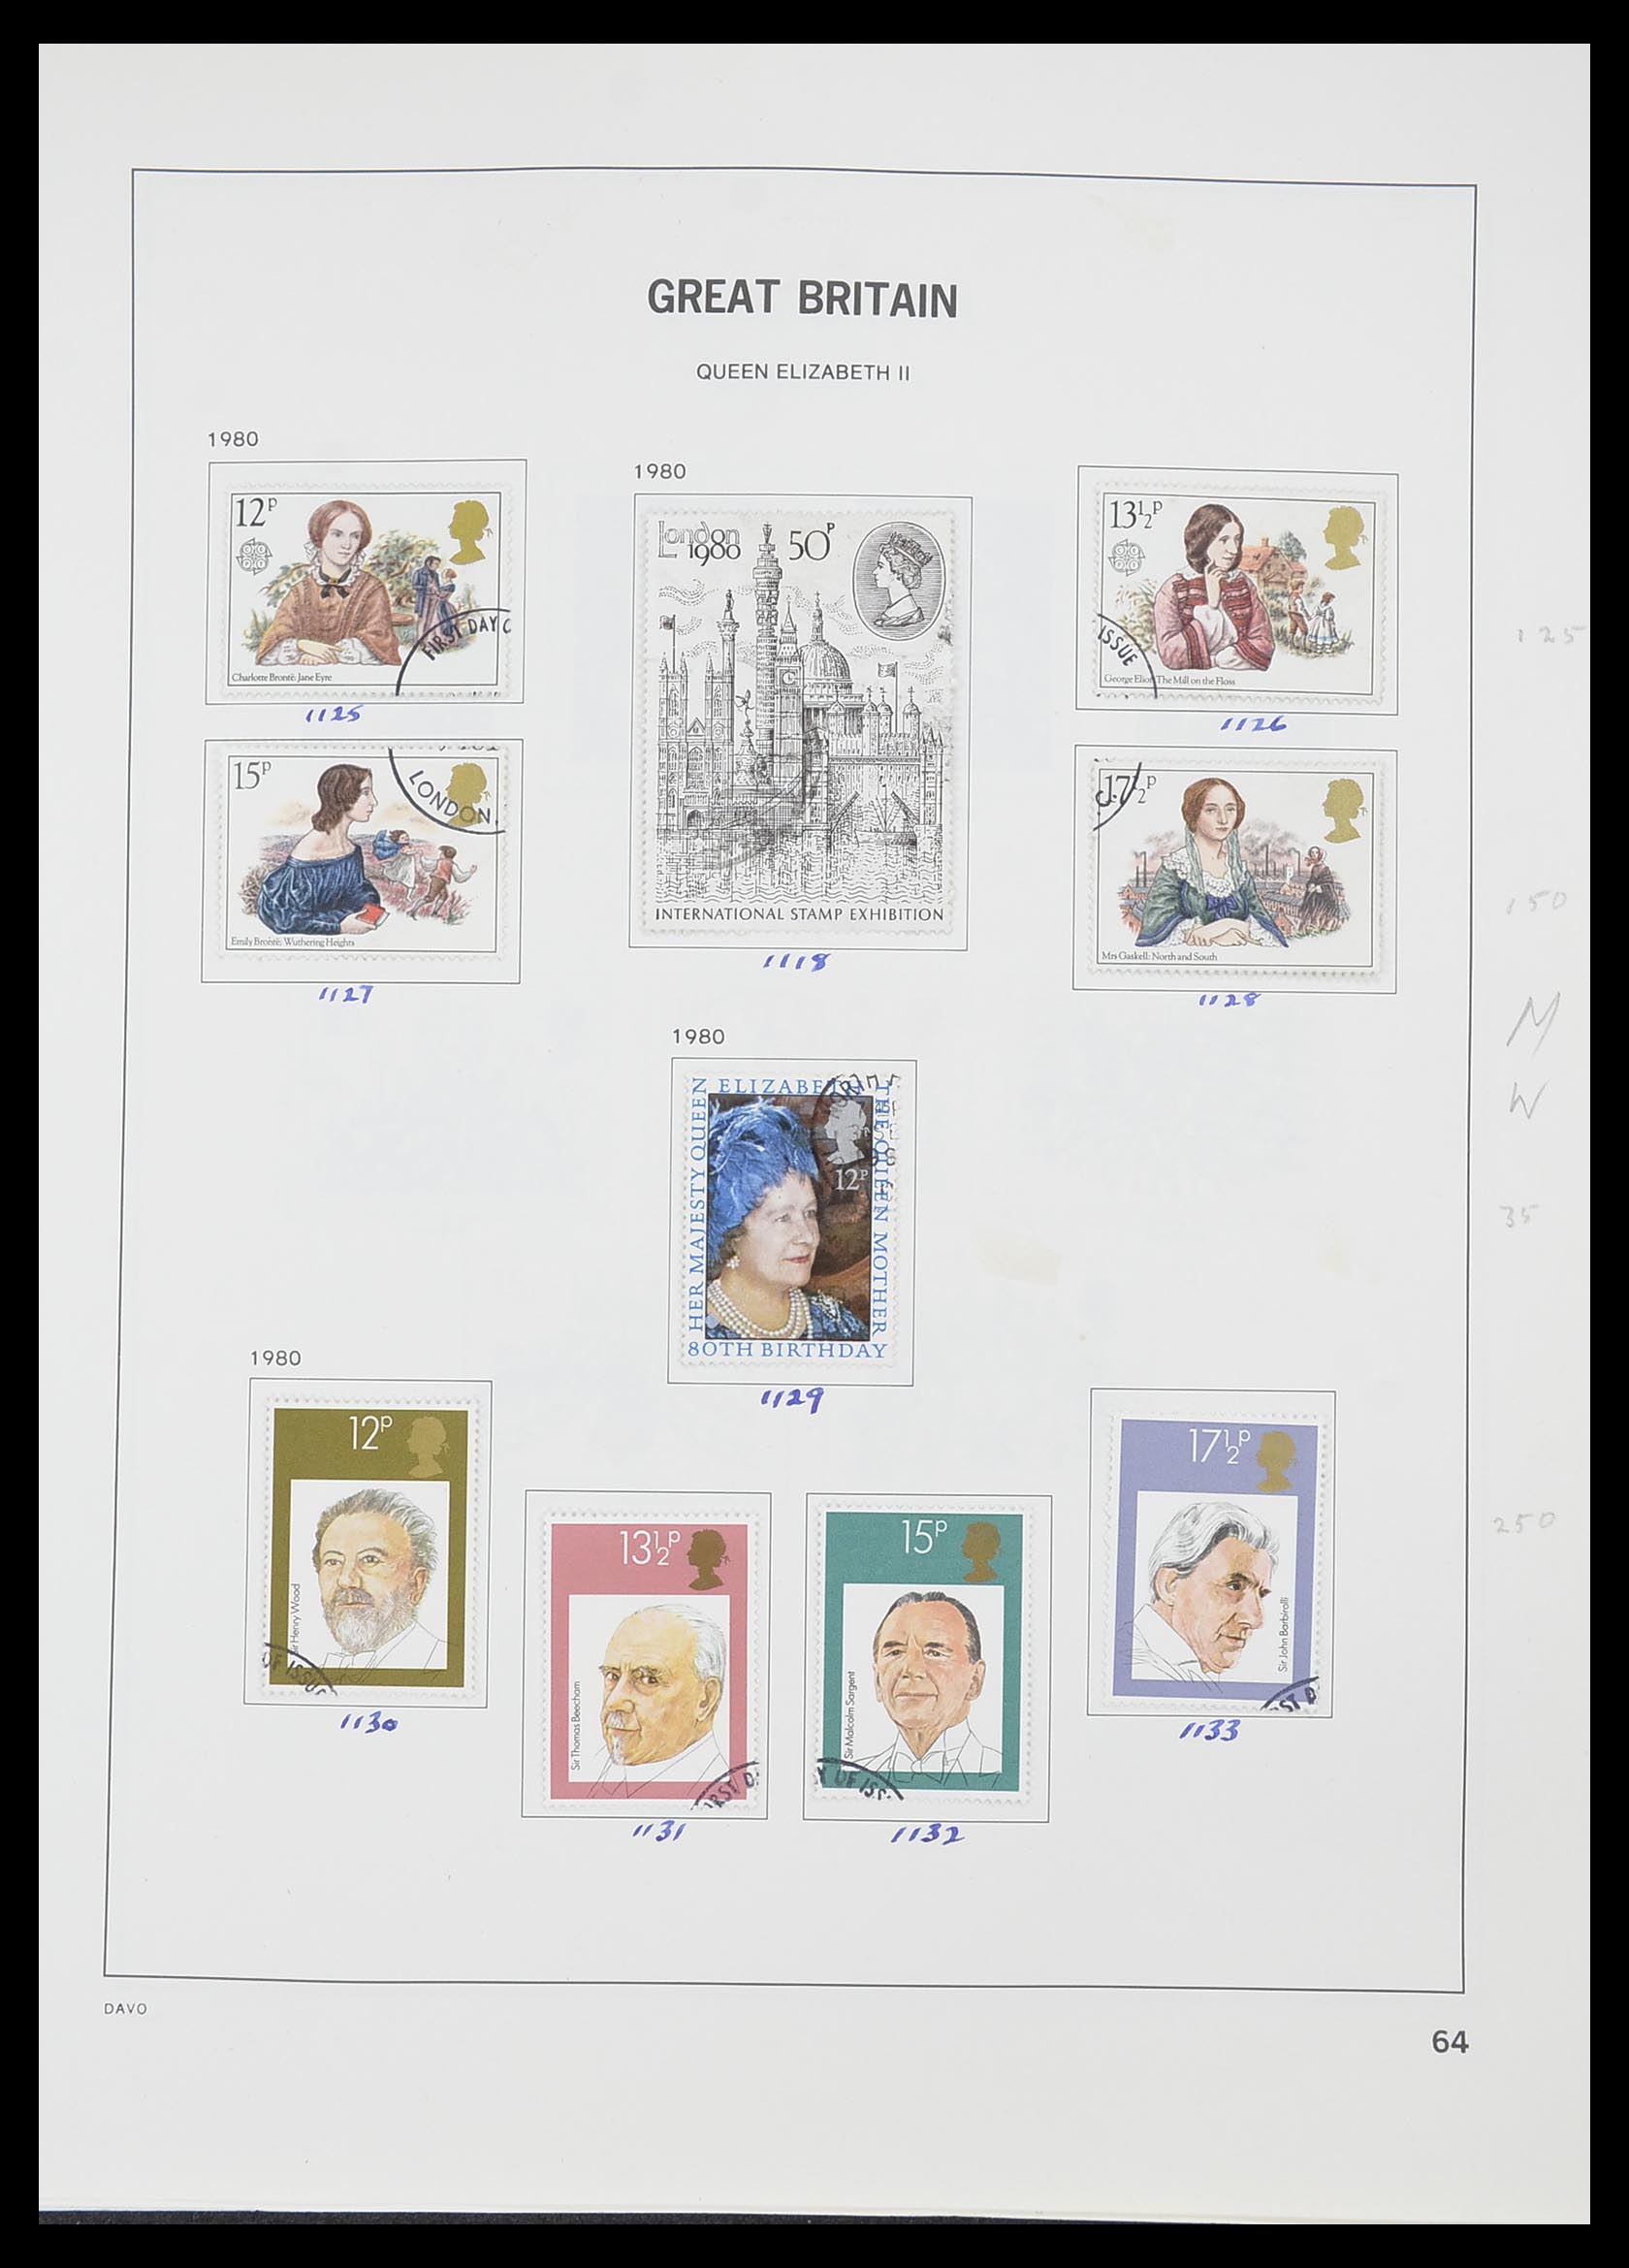 33419 072 - Stamp collection 33419 Great Britain 1875-1993.